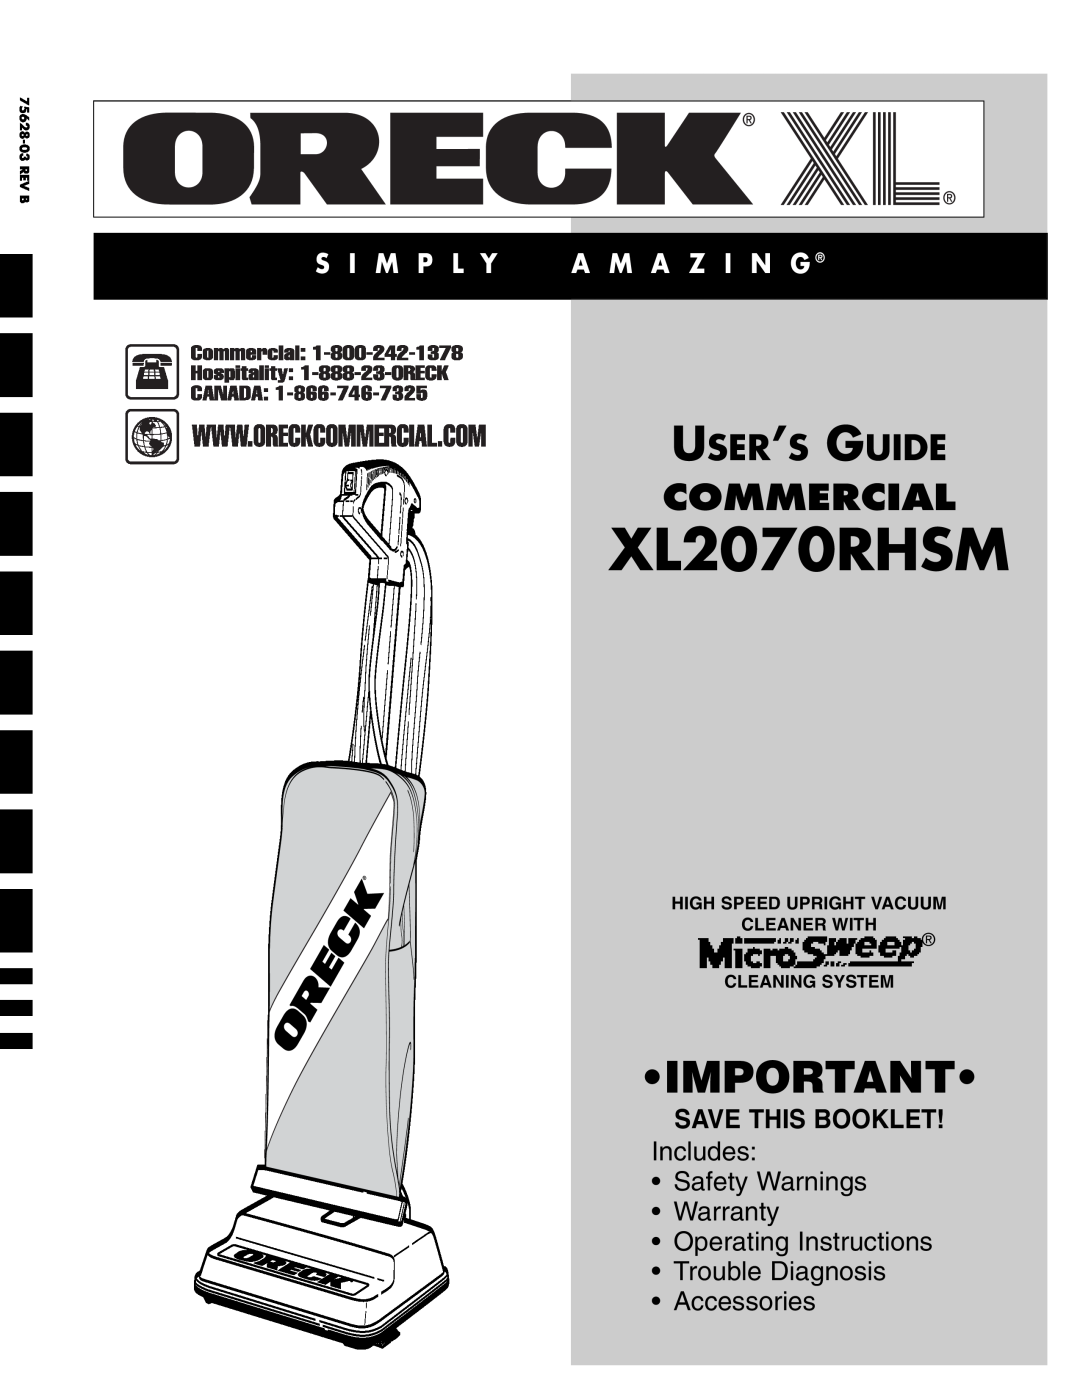 Oreck XL2070RHSM warranty User’S Guide, Save This Booklet, Commercial, S I M P L Y, A M A Z I N G, Accessories 